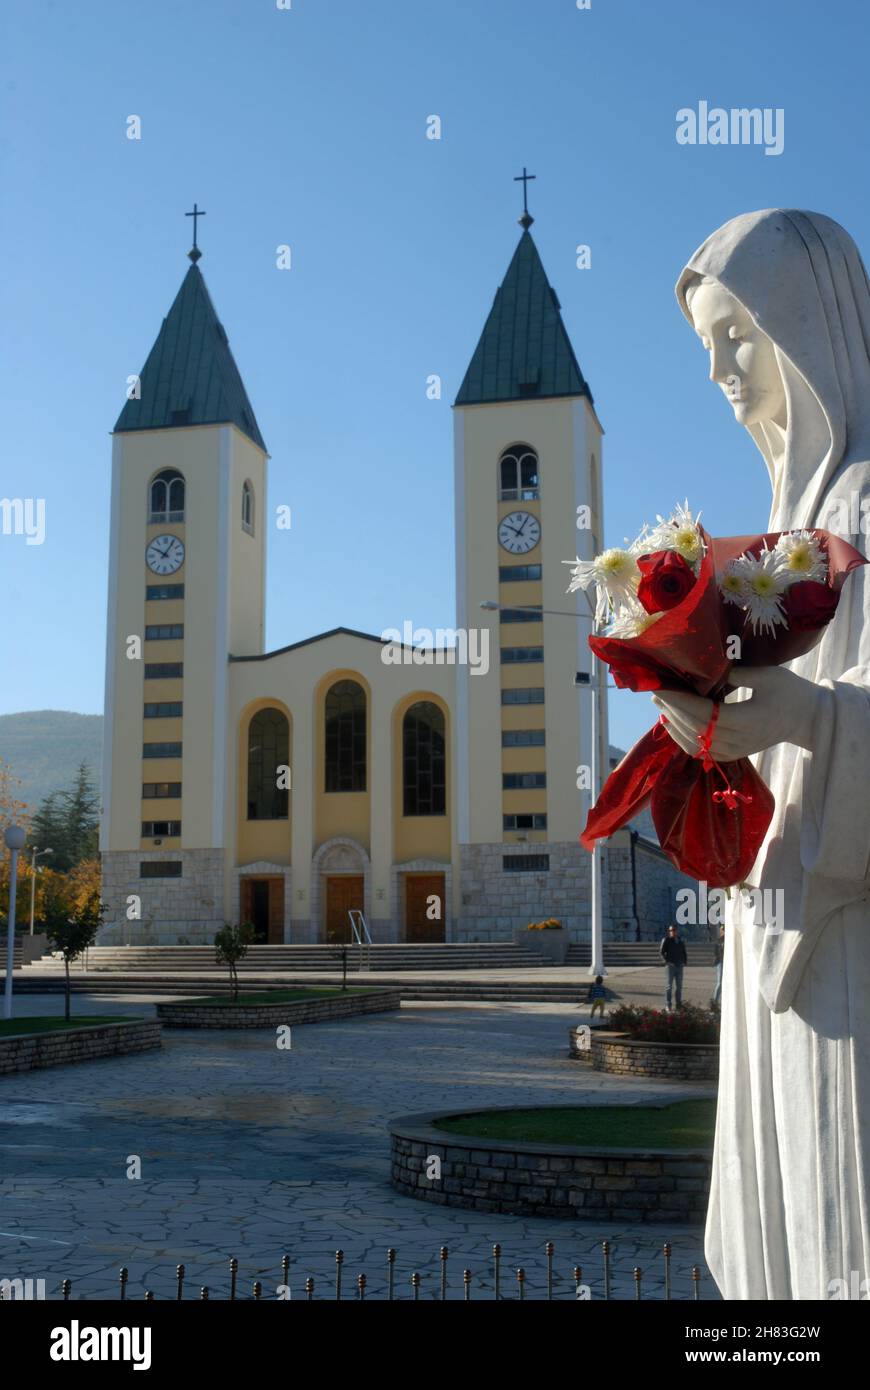 Statue of Virgin Mary, Queen of Peace, in front of Medjugorje Catholic Church, Medjugorje, Bosnia and Herzegovina. Stock Photo